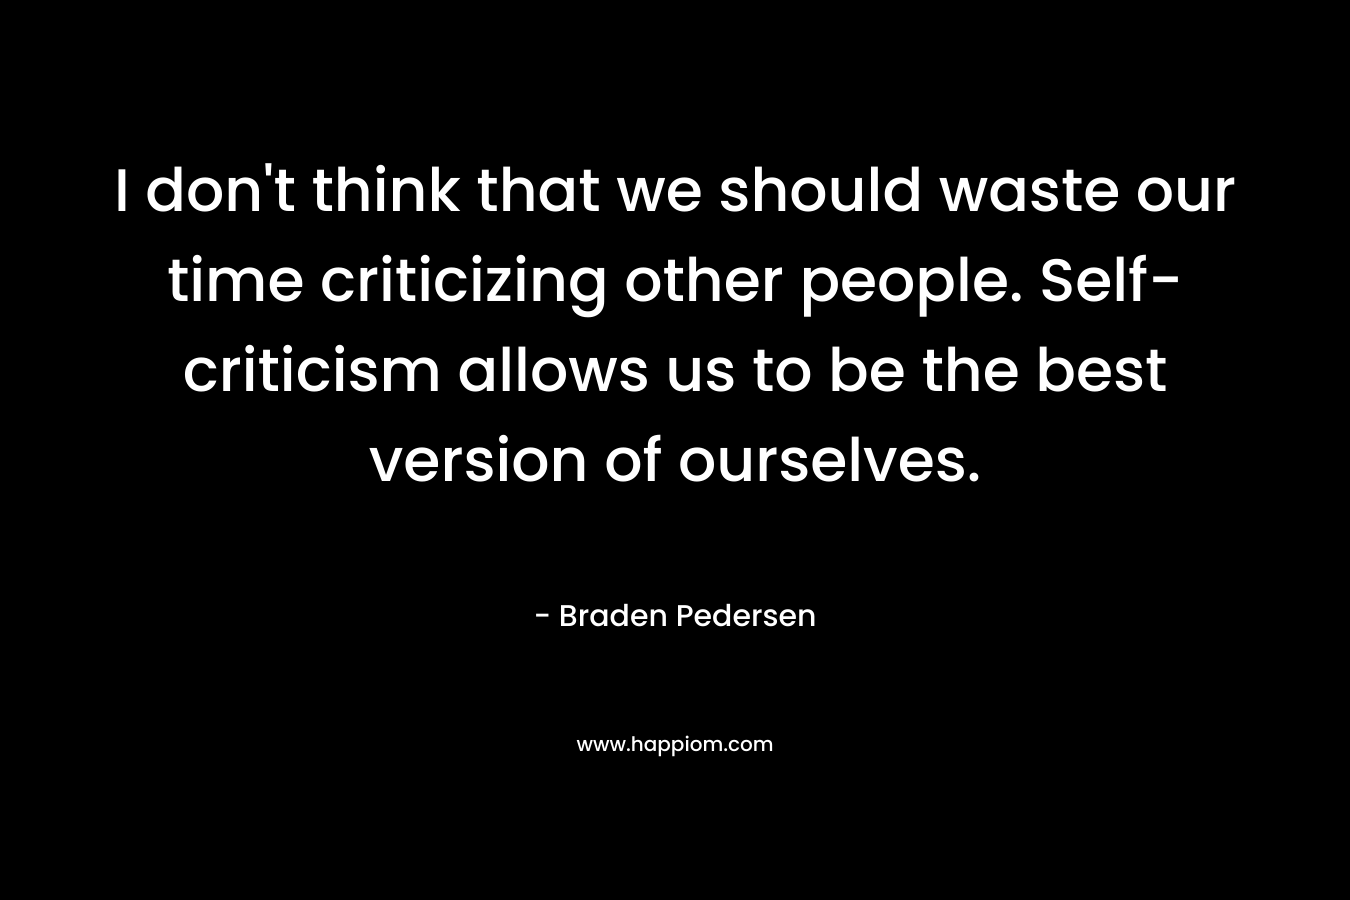 I don't think that we should waste our time criticizing other people. Self-criticism allows us to be the best version of ourselves.